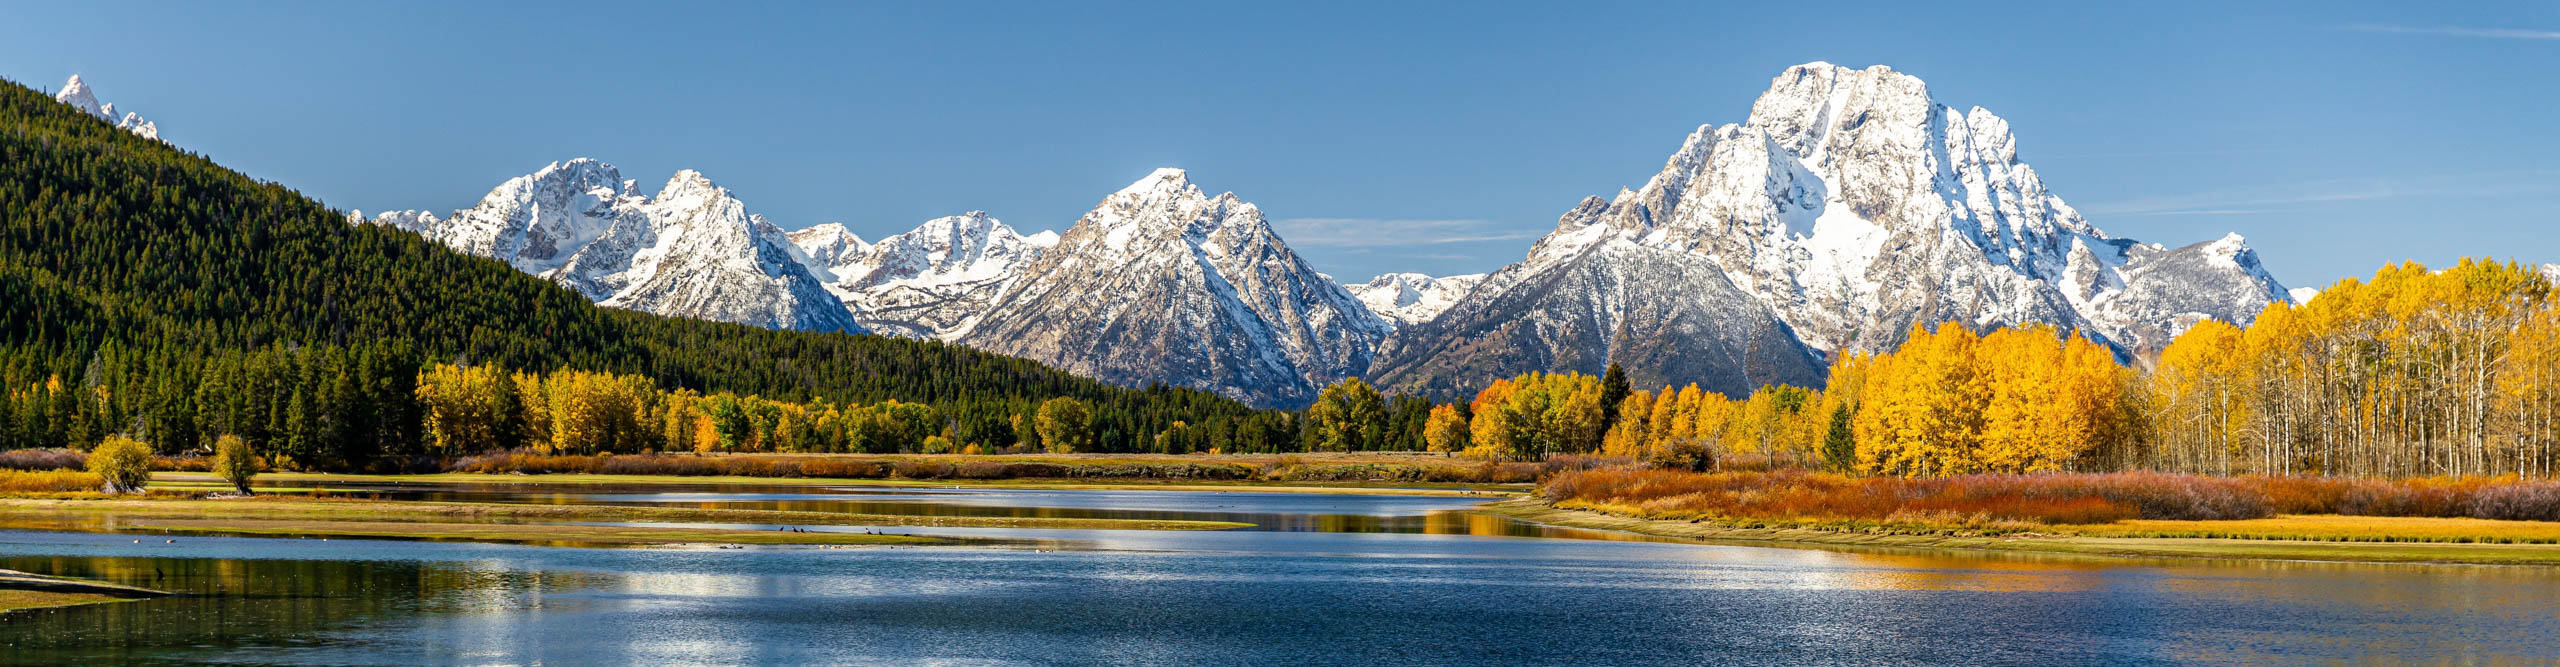 view of Mount Moran from Oxbow Bend beside Snake River of Grand Teton, Wyoming, USA